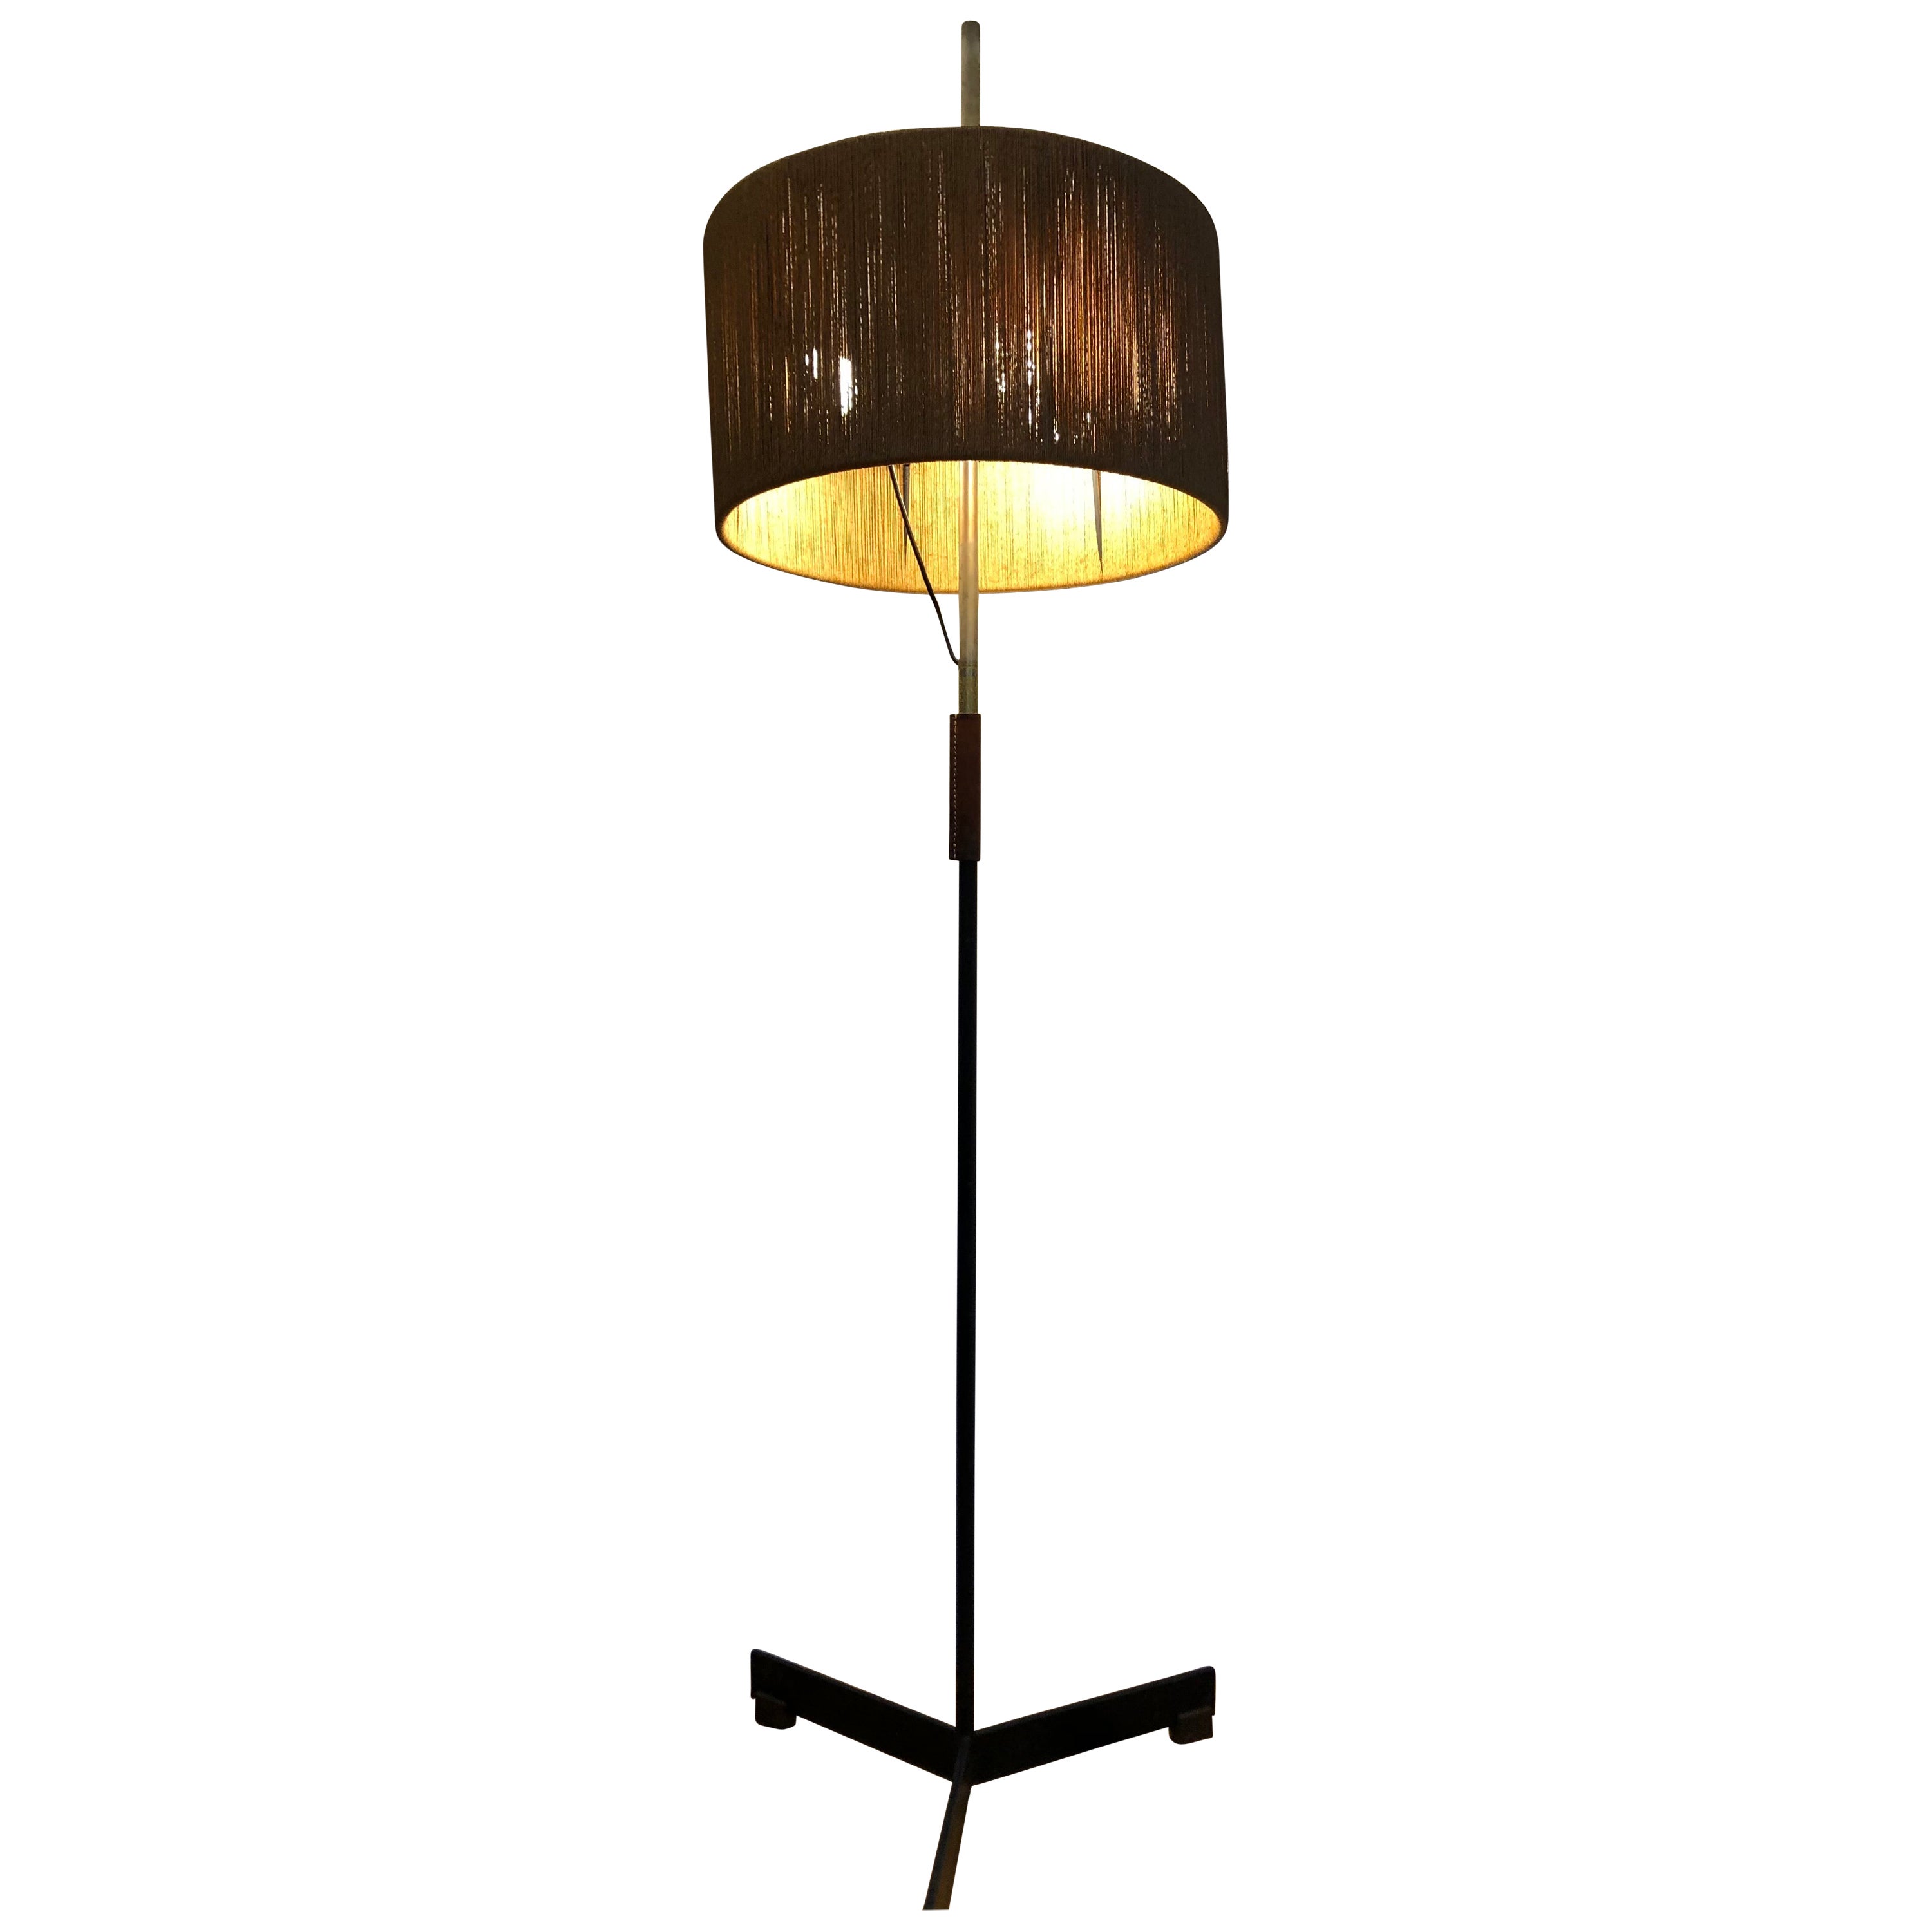 Tall floor lamp made in Vienna /Austria in the late 50‘s or early 60‘s.
Heavy and worthy execution in excellent condition.
A beautiful dark leather wrapping on the shaft.
Has placings for three light bulbs and a wonderful flax wrapped lamp